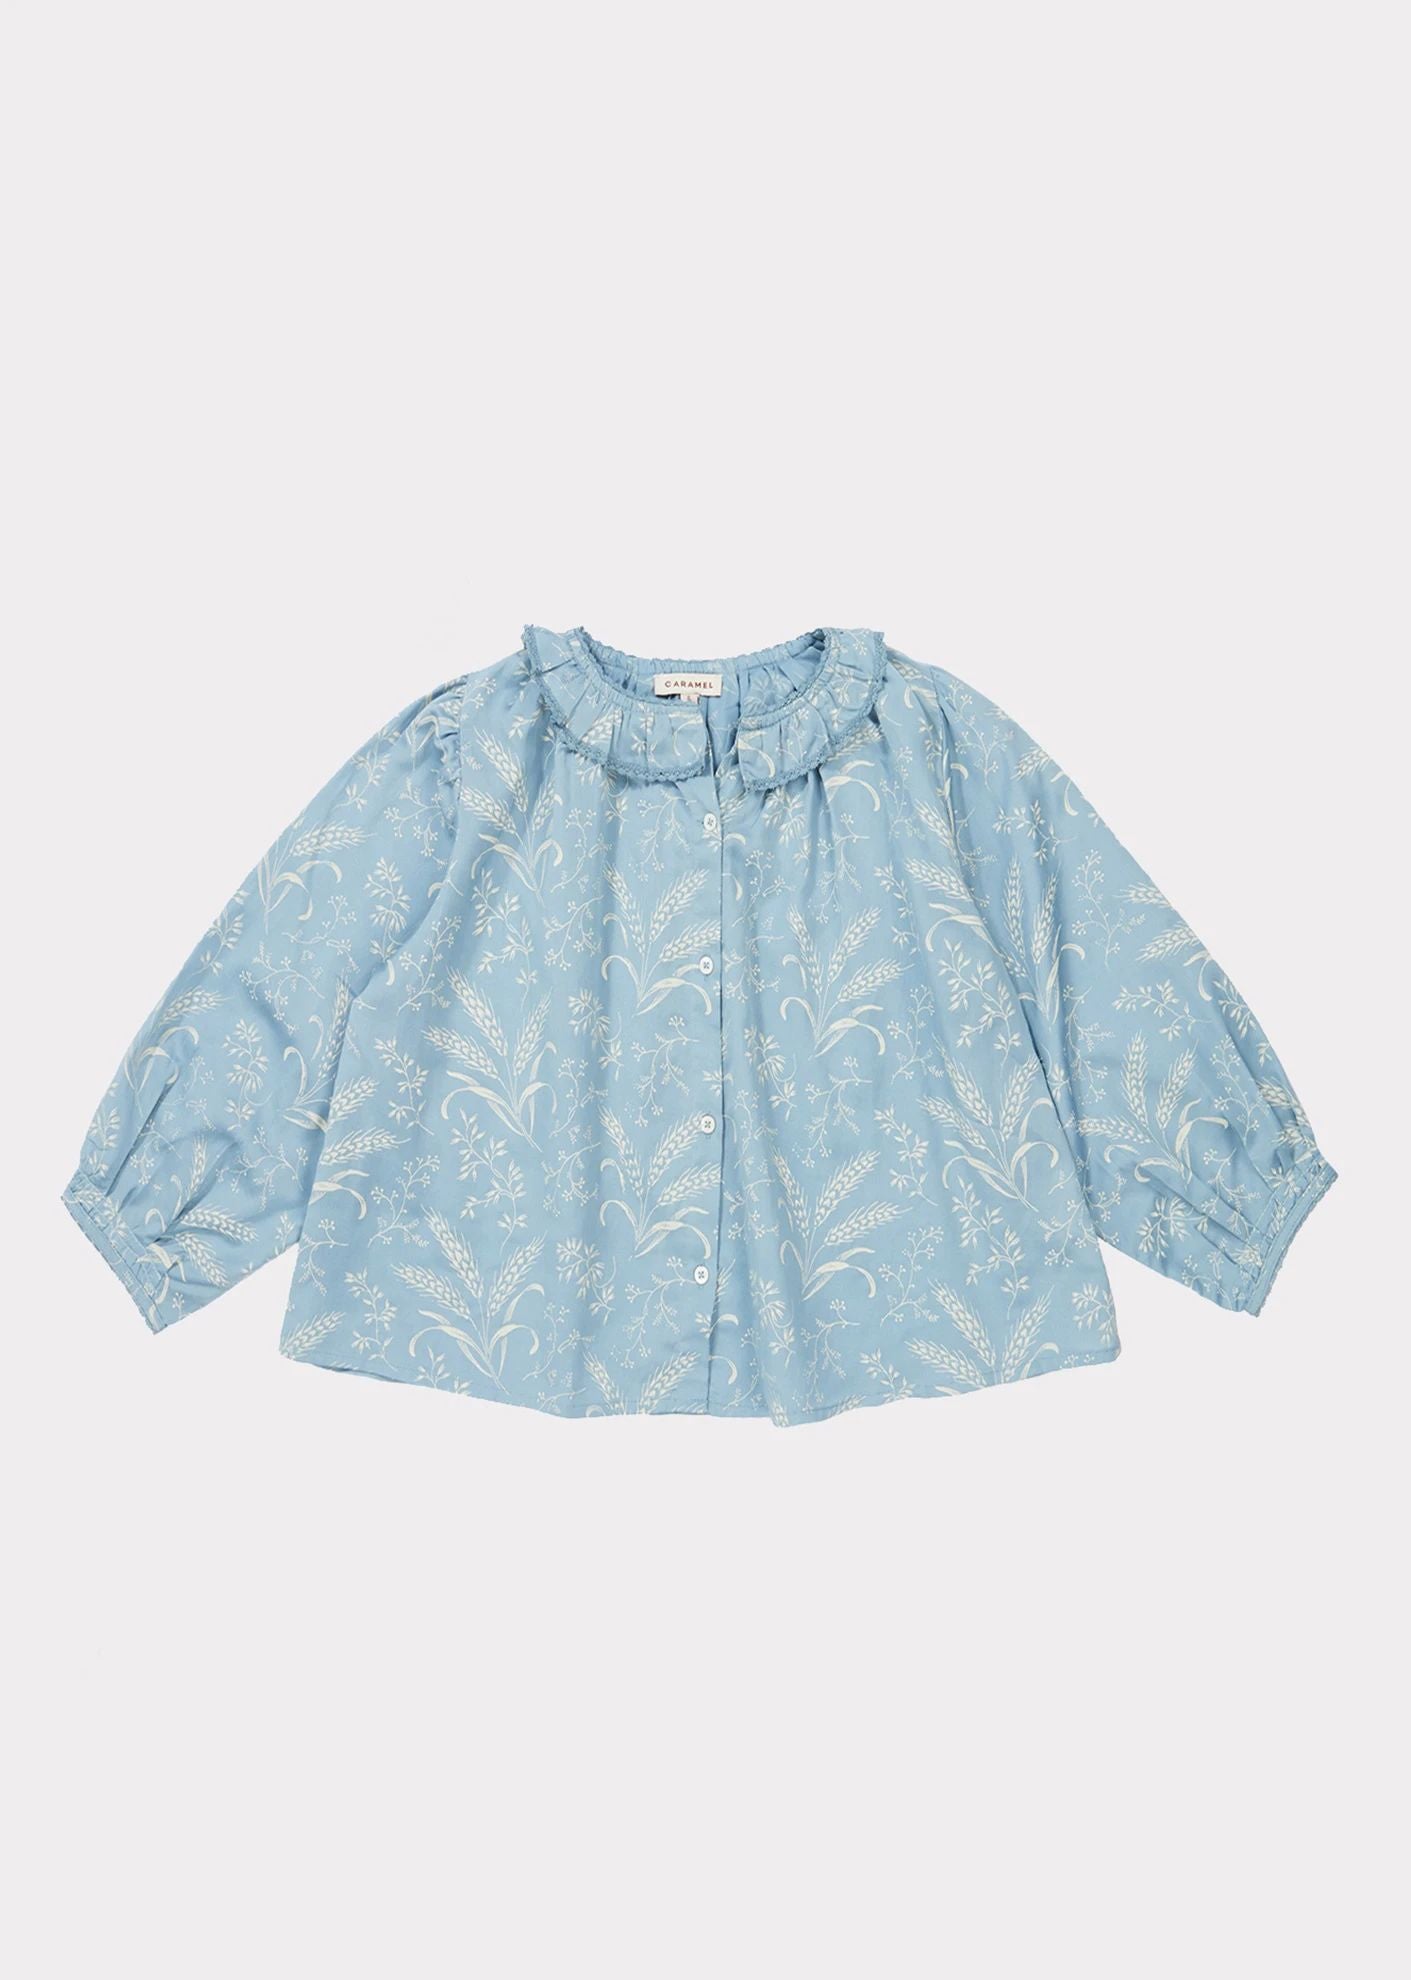 Baby Girls Blue Flower Printed Cotton Top